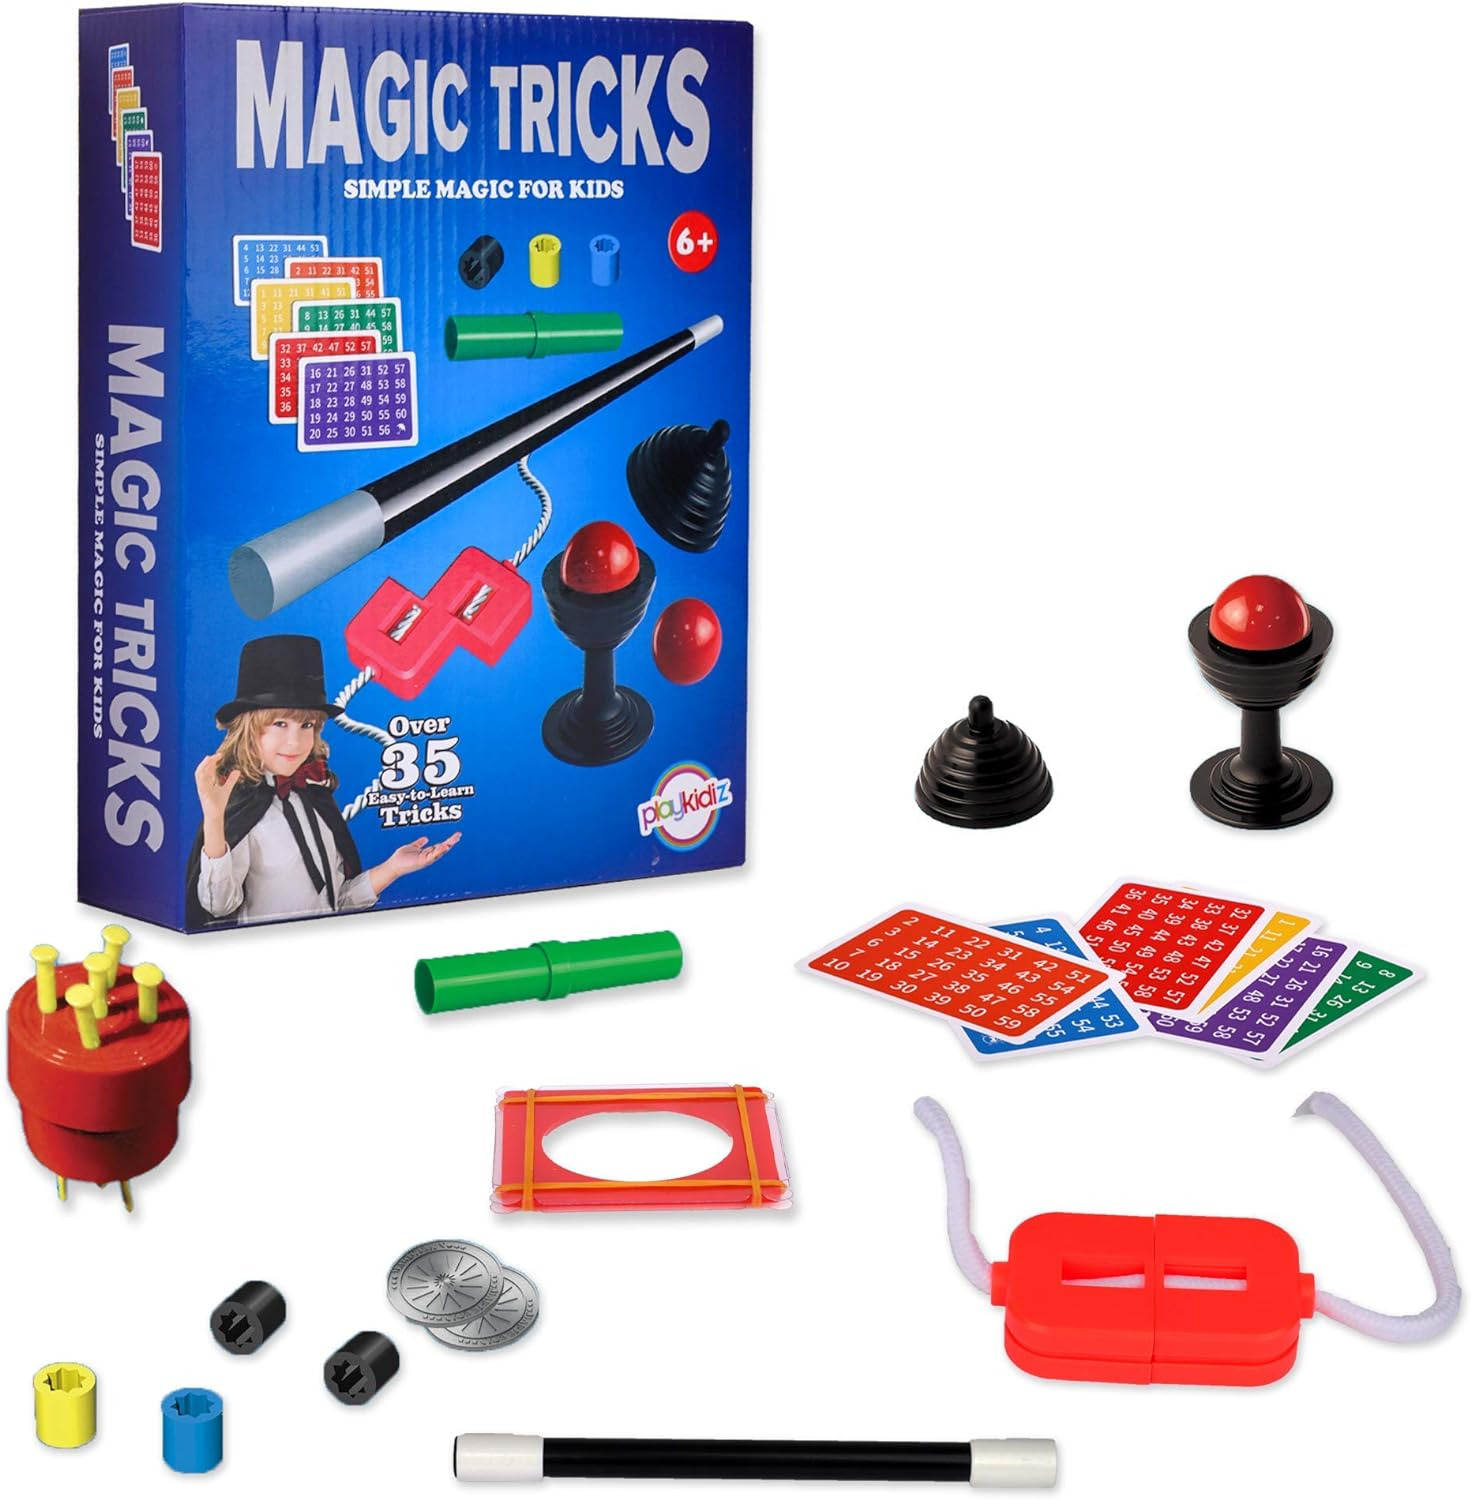 Magic Trick for Kids Set 1 - Magic Set with over 35 Tricks Made Simple, Magician